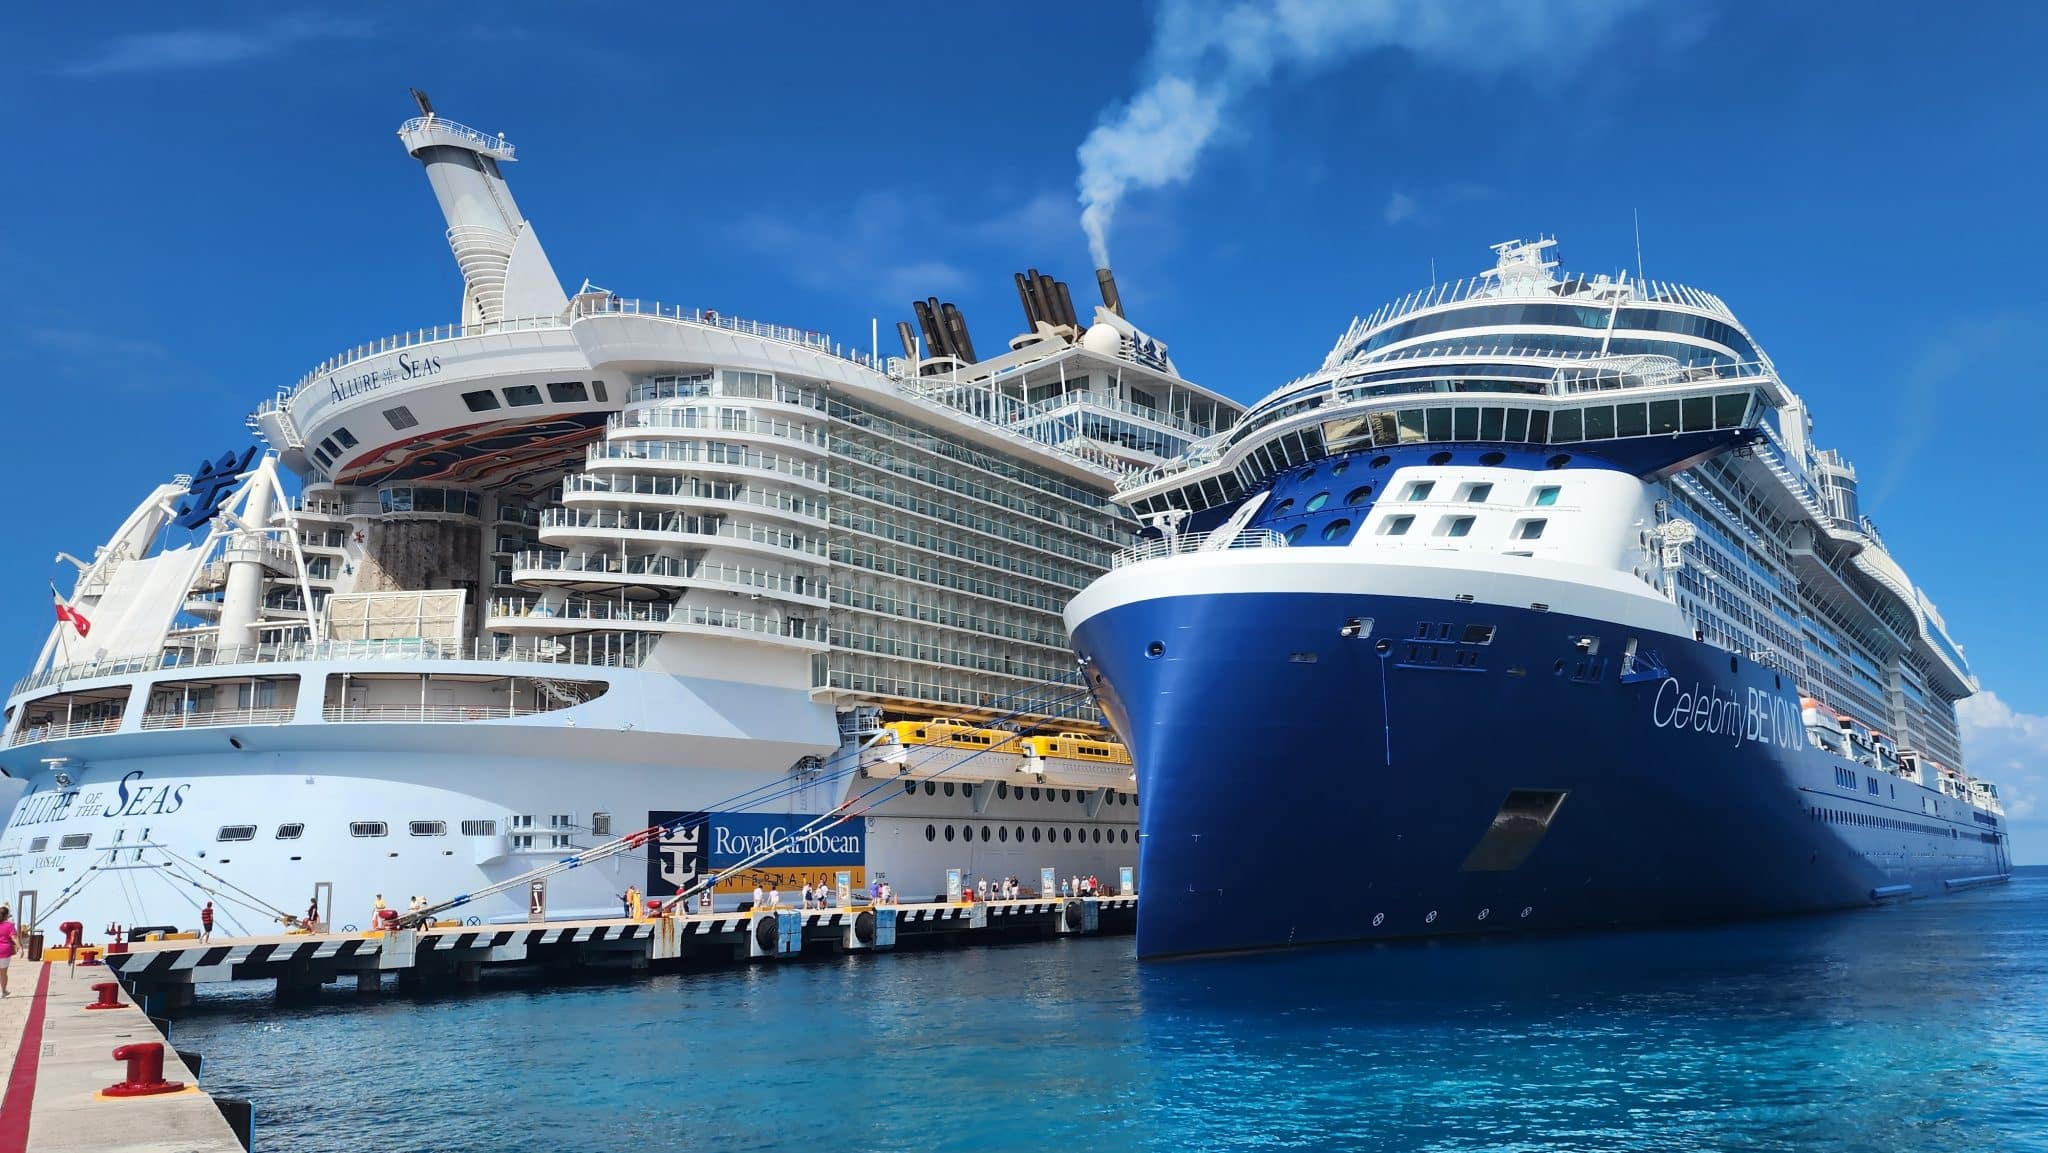 Royal Caribbean's Allure of the Seas and Celebrity Cruises' Beyond